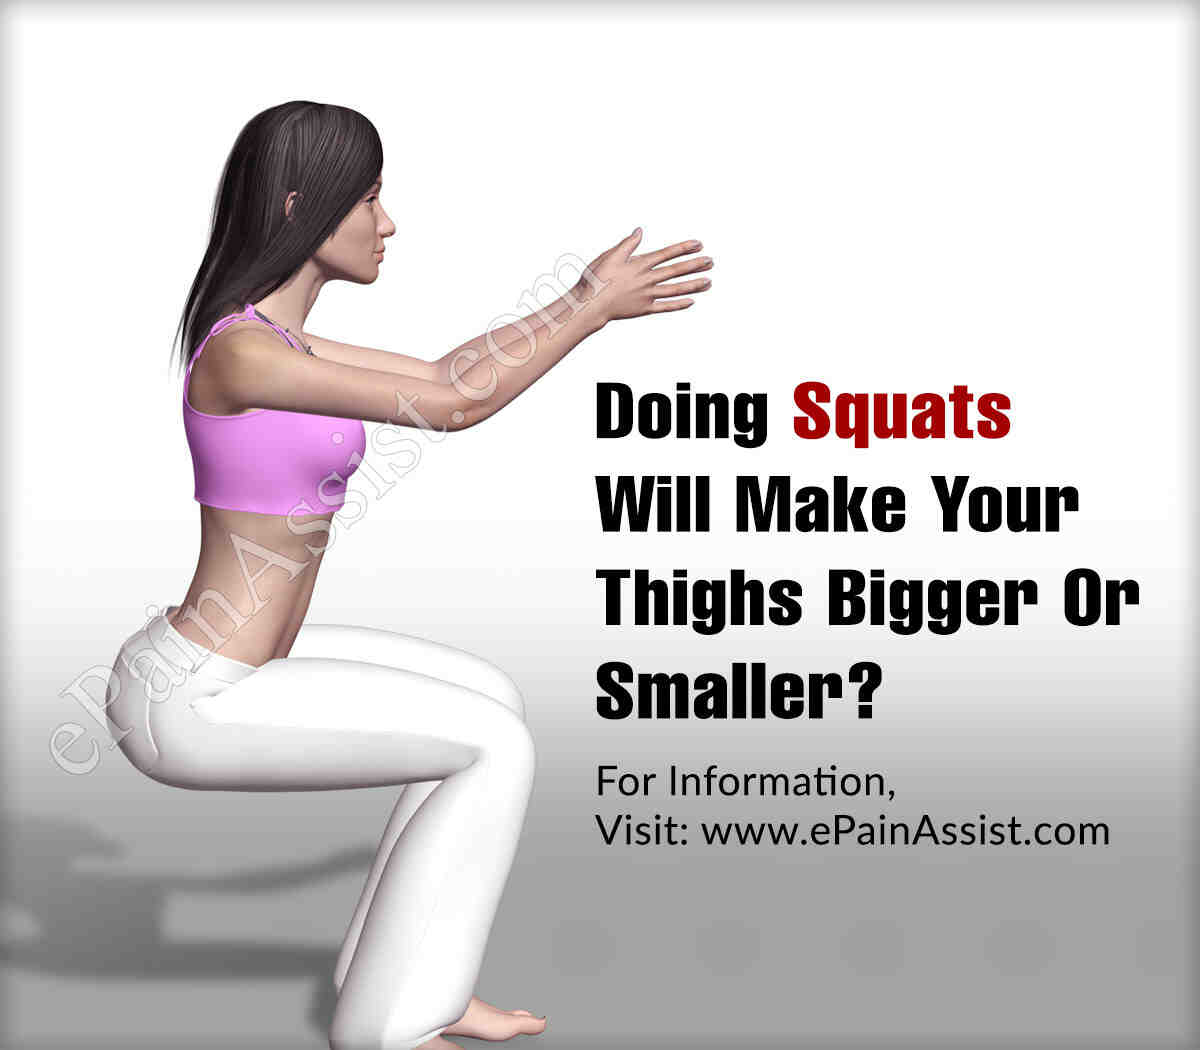 Do squats make your thighs bigger or smaller?